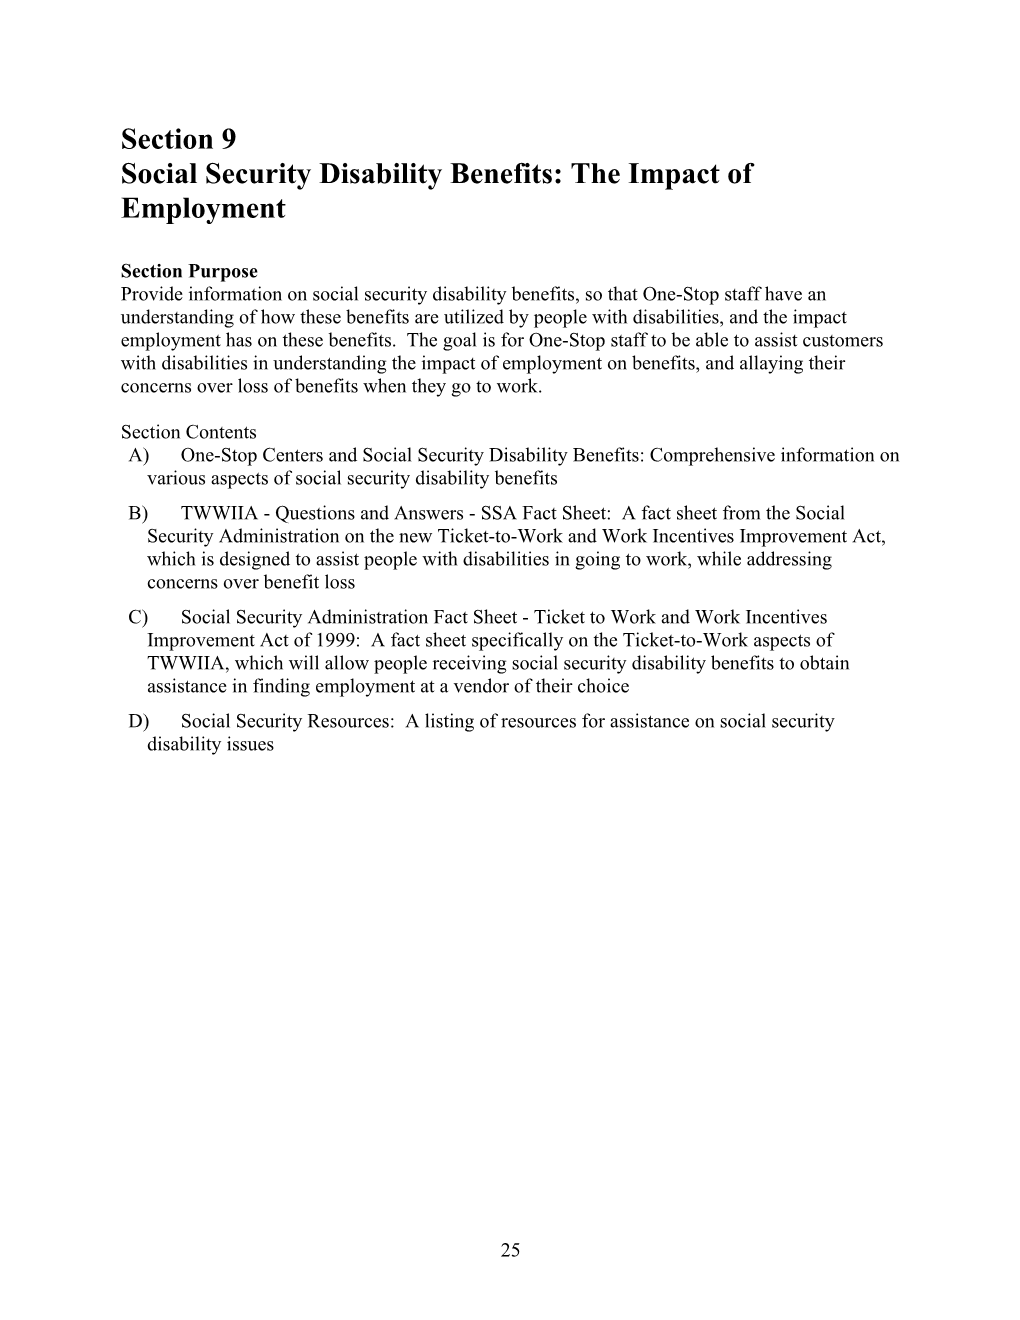 Social Security Disability Benefits: the Impact of Employment